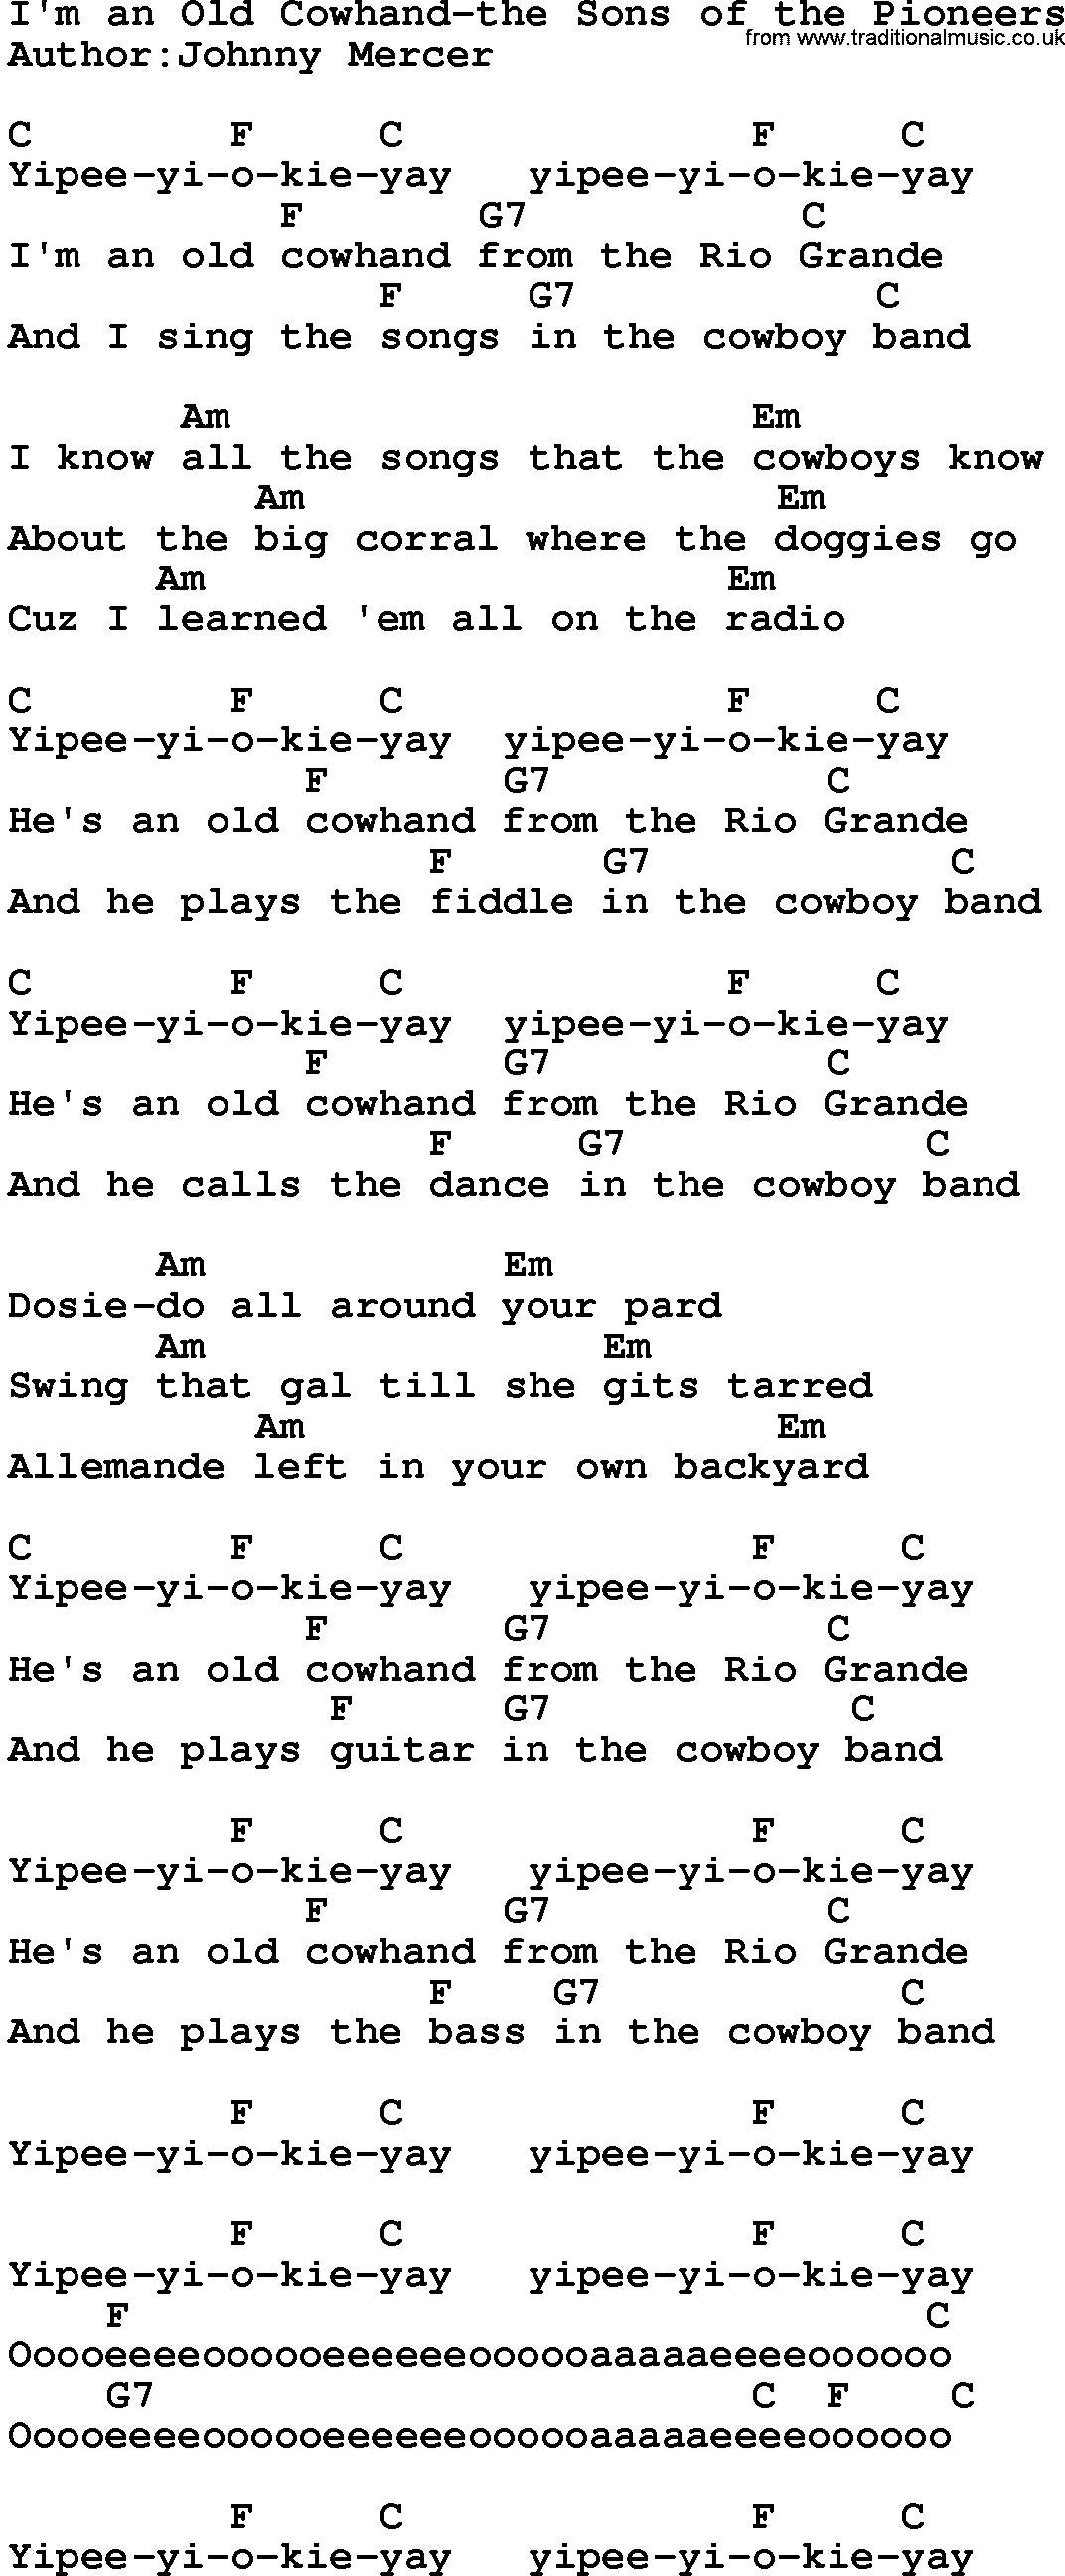 Country music song: I'm An Old Cowhand-The Sons Of The Pioneers lyrics and chords